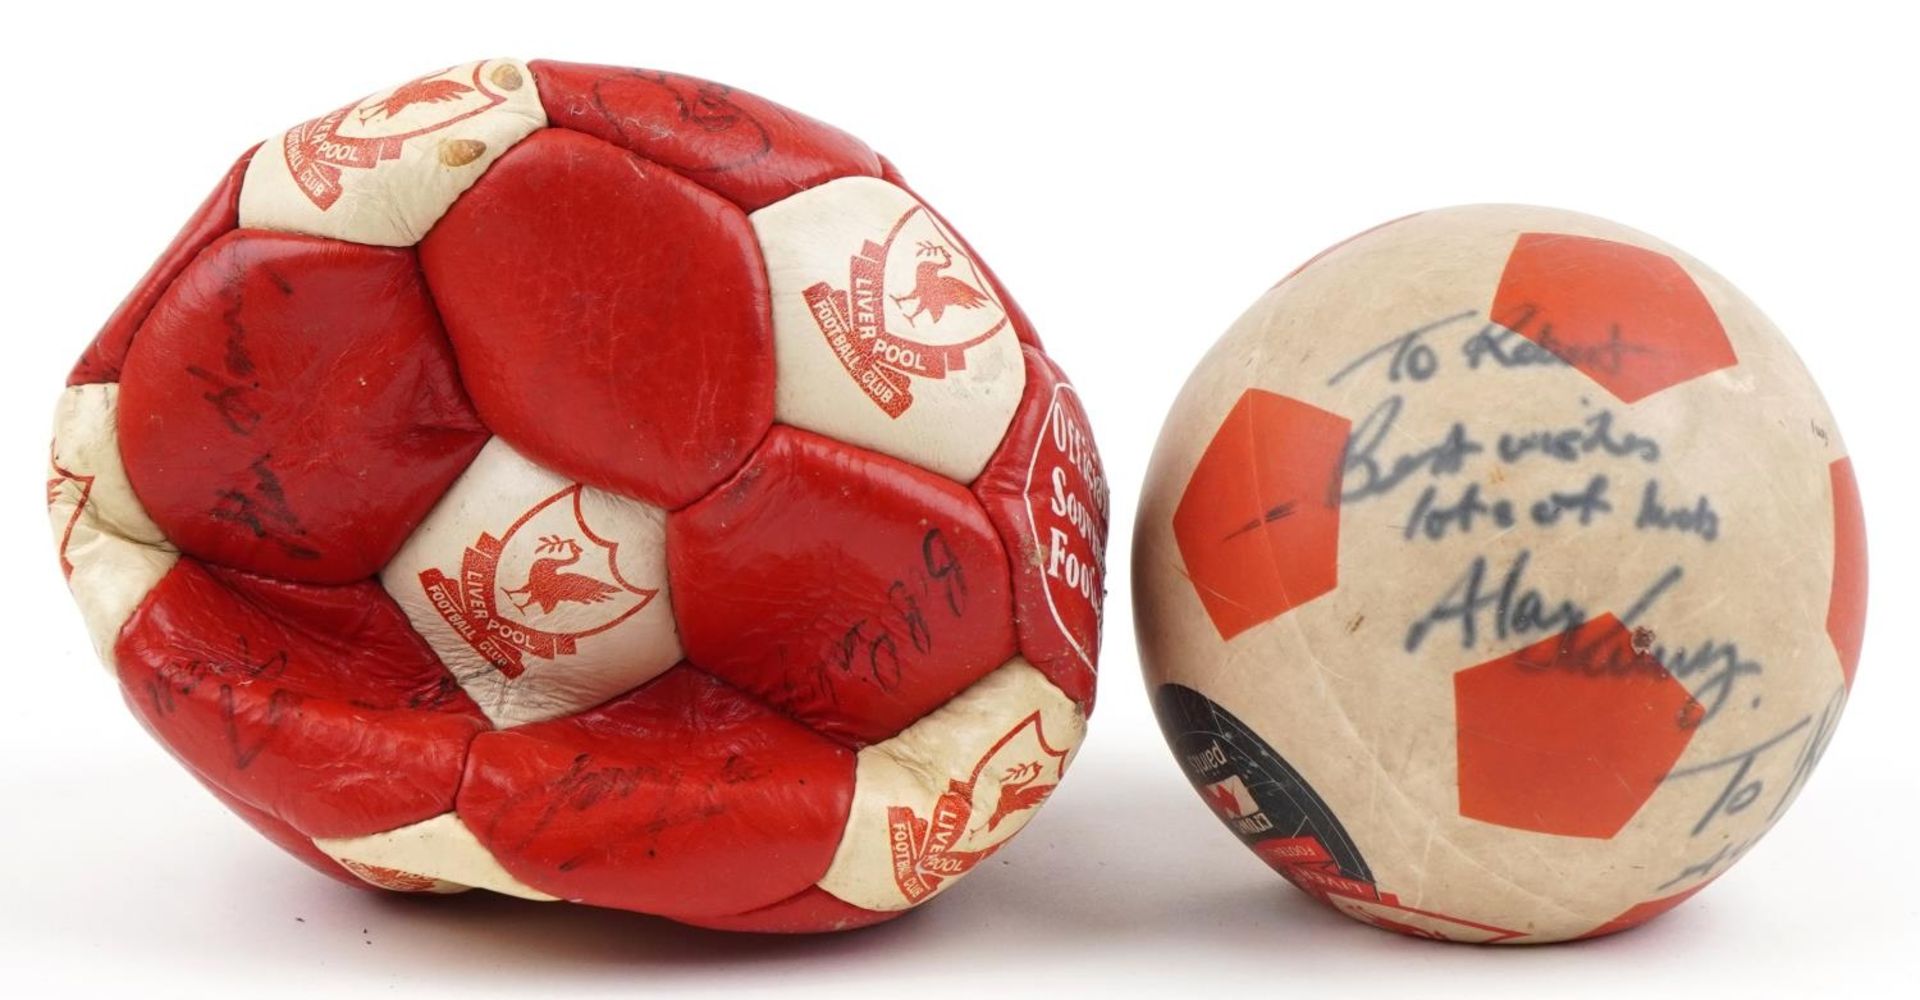 Two 1980s footballing interest Liverpool Football Club signed footballs including the signatures